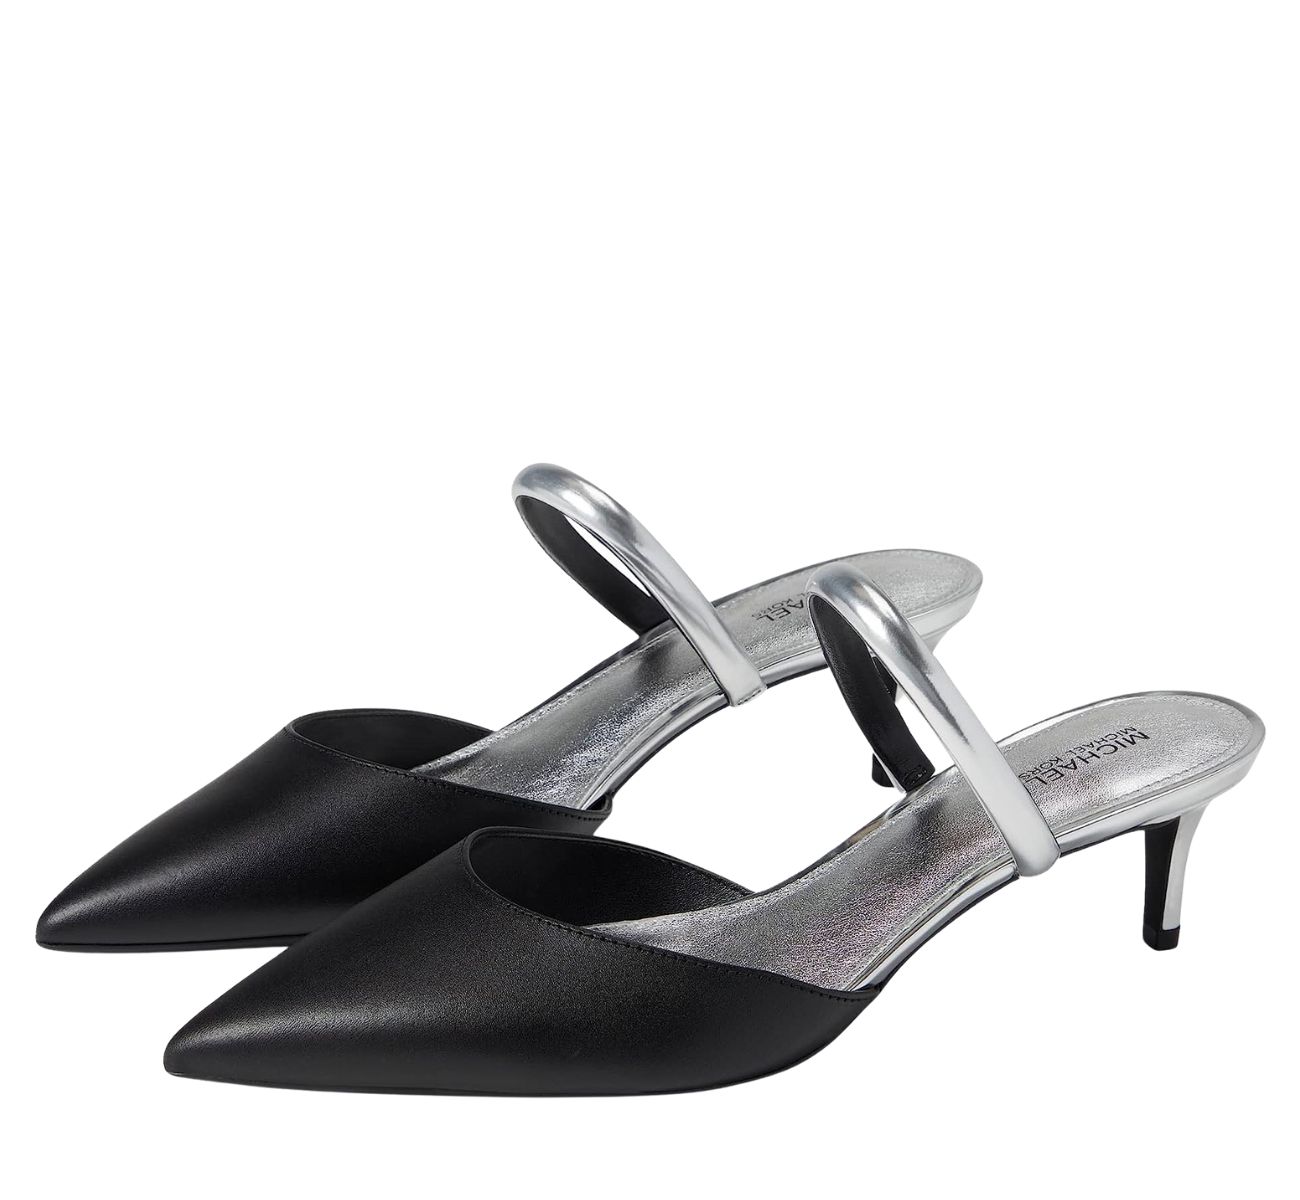 Black and silver pointed toe slip on kitten heels on white background.